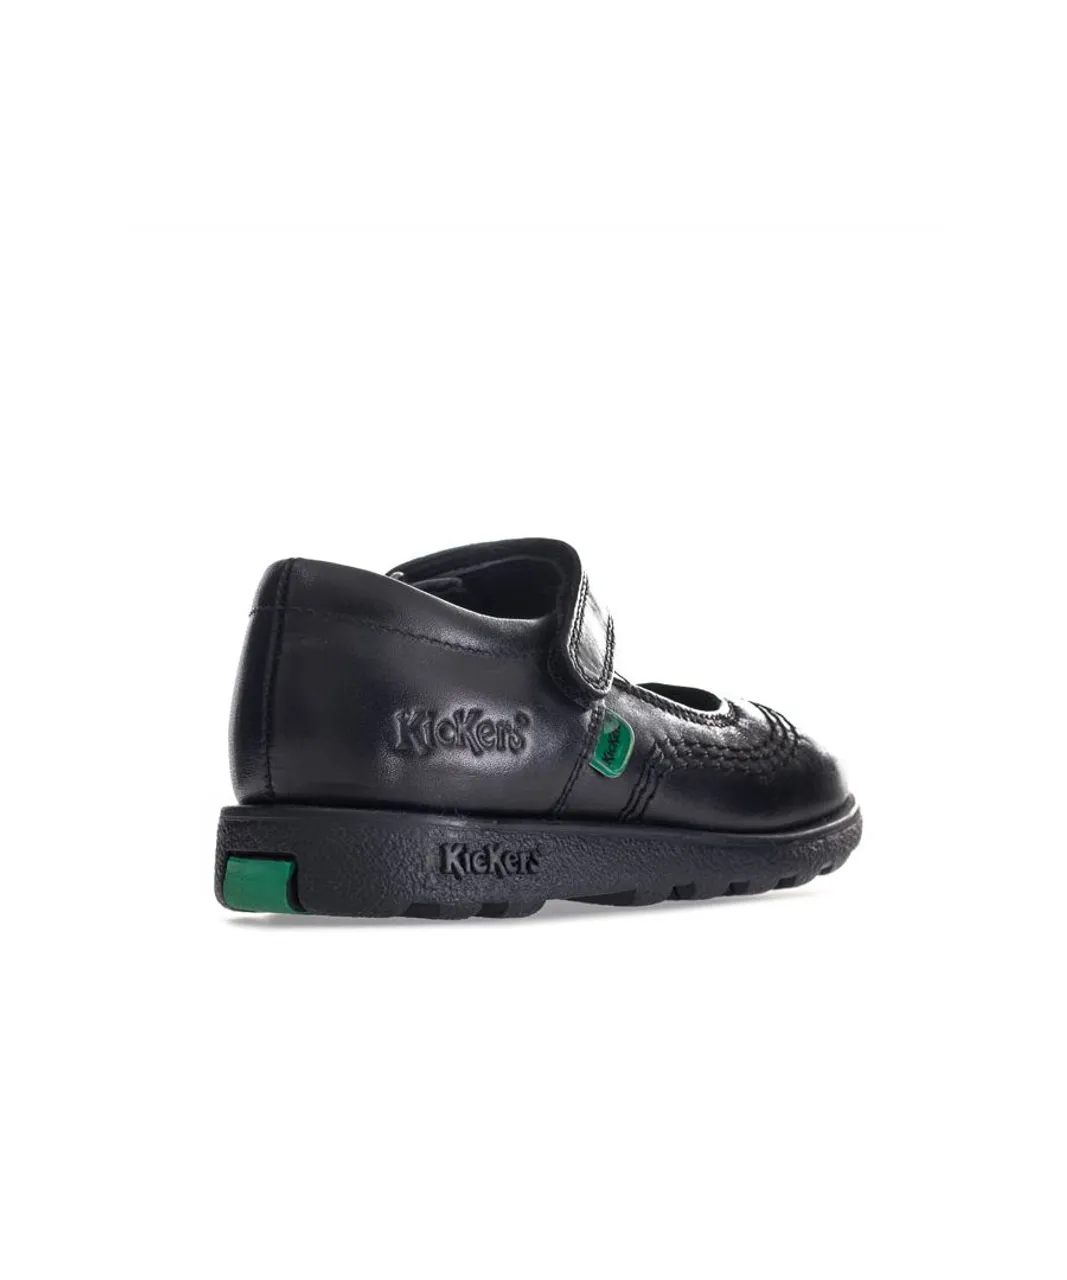 Kickers Childrens Unisex Fragma Pop Shoes - Black Leather